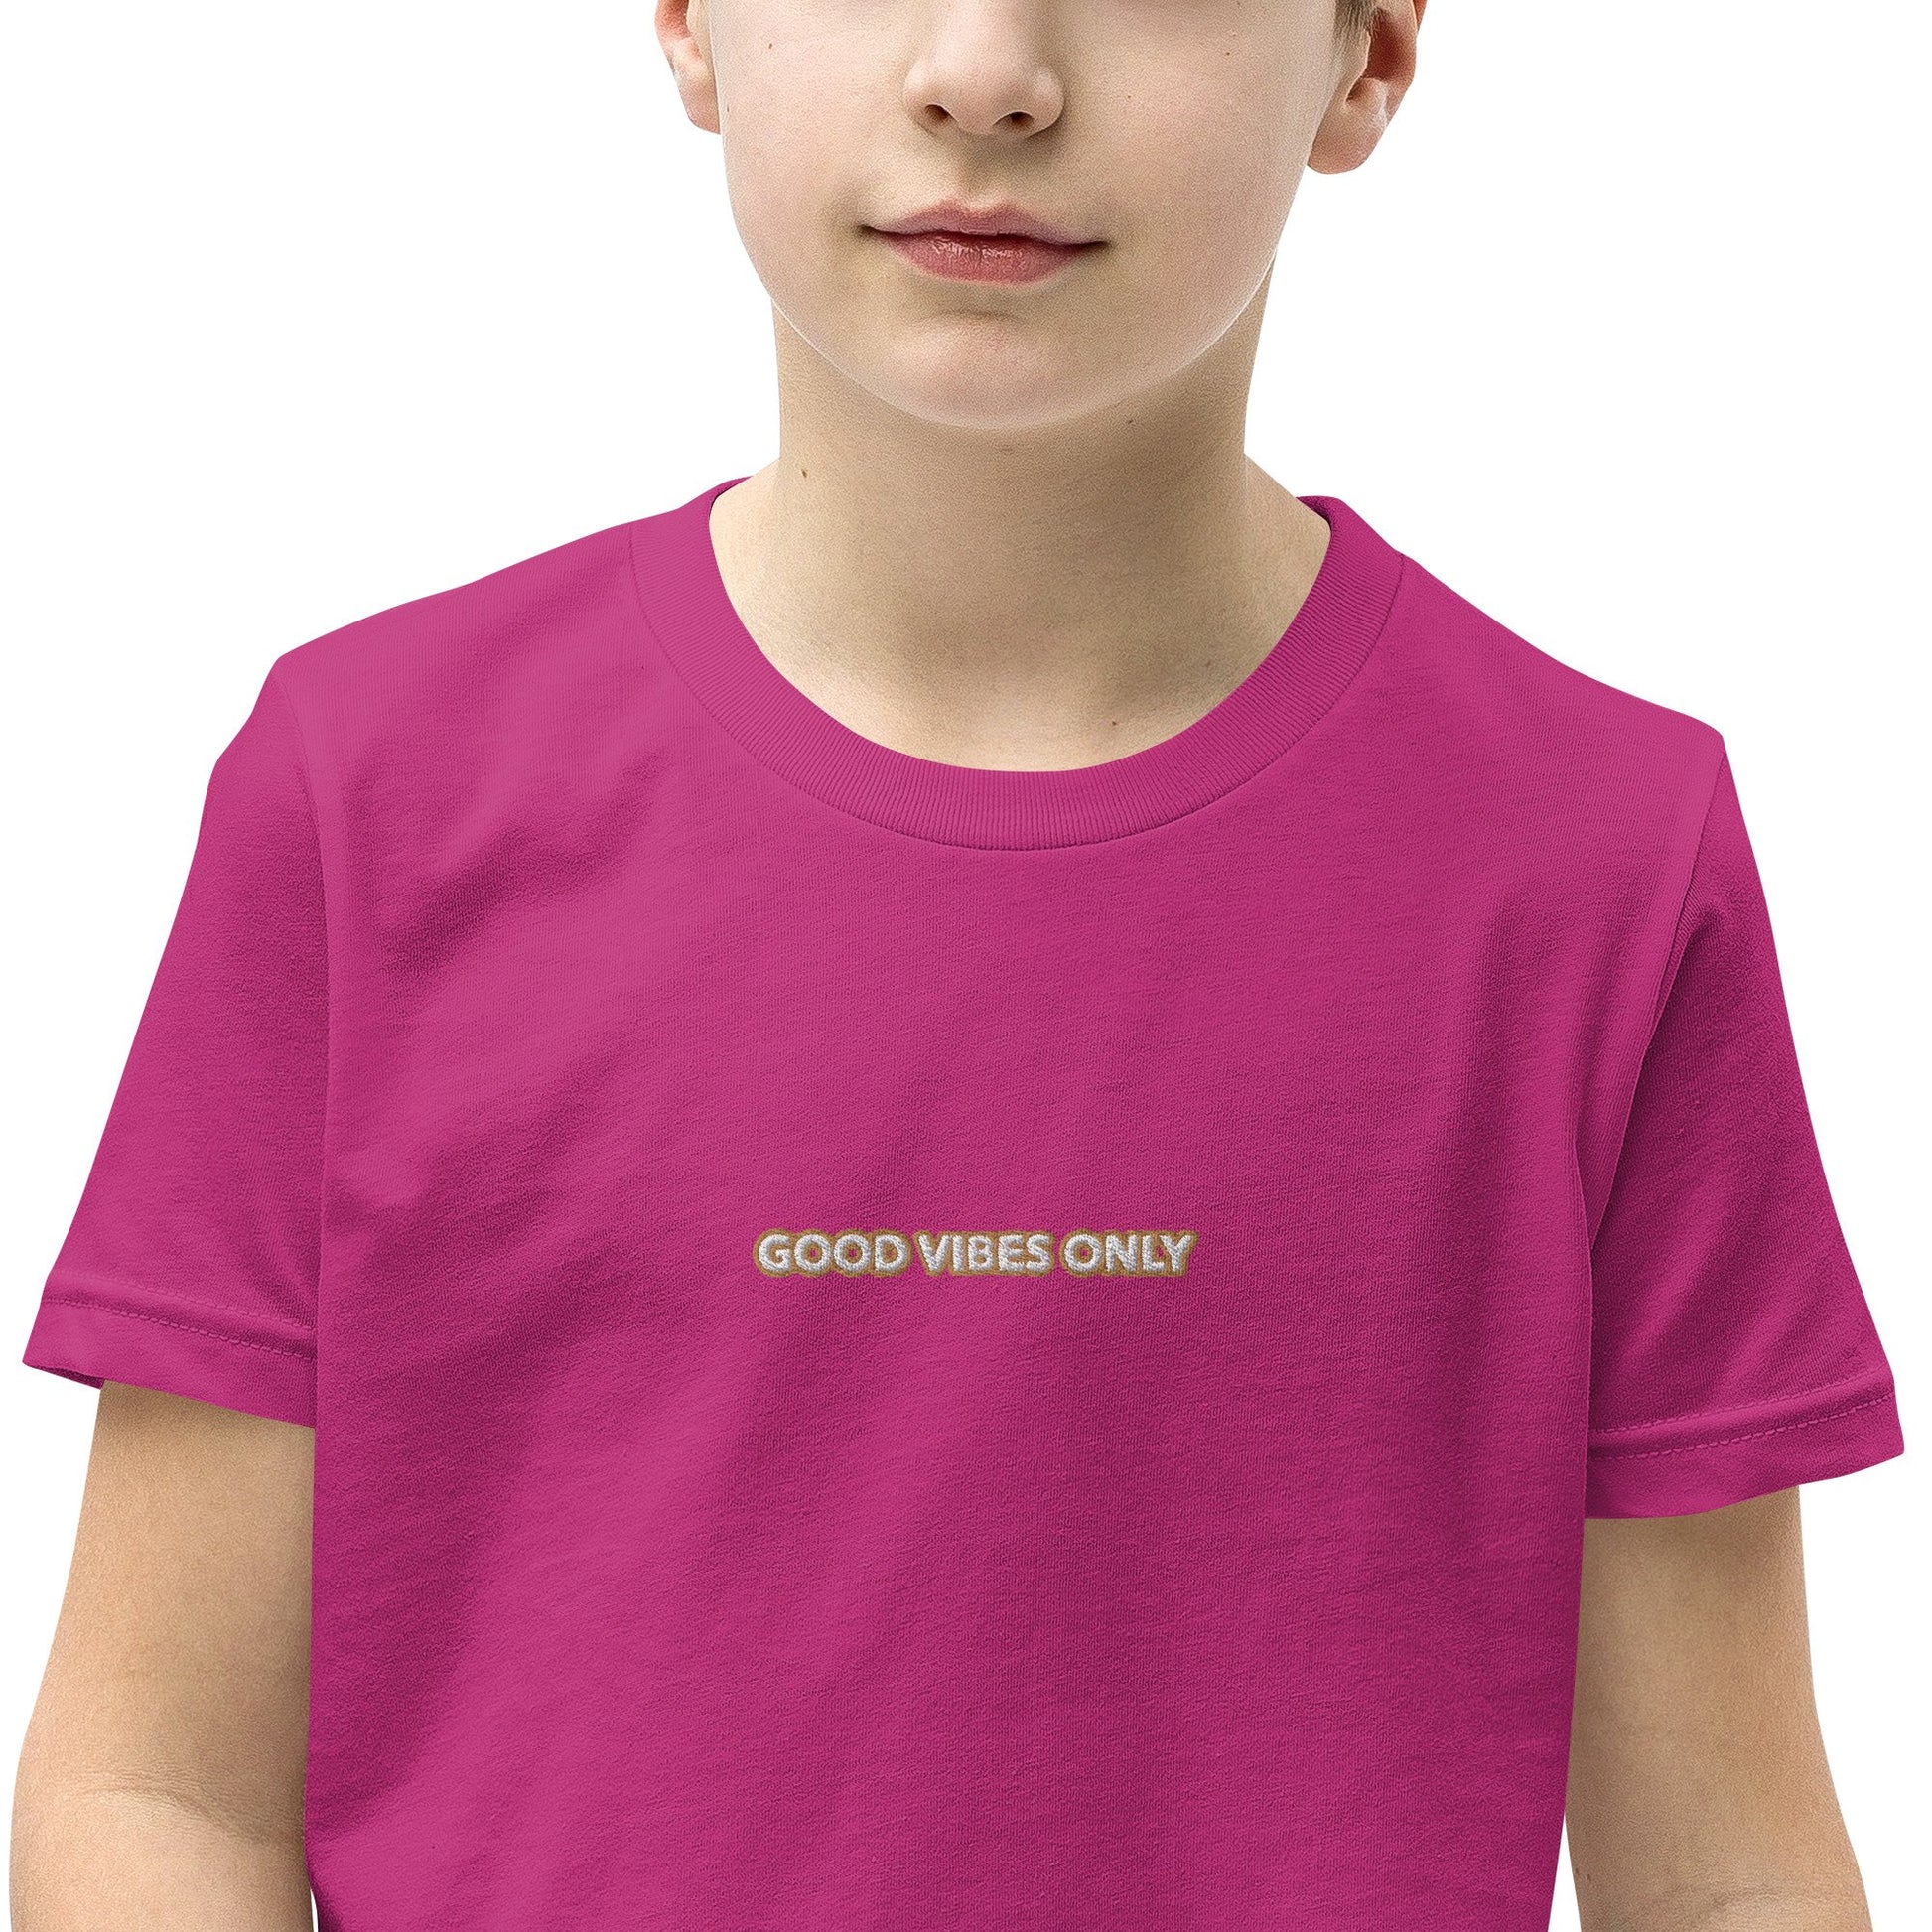 GOOD VIBES ONLY - Unisex Youth Short Sleeve T-Shirt